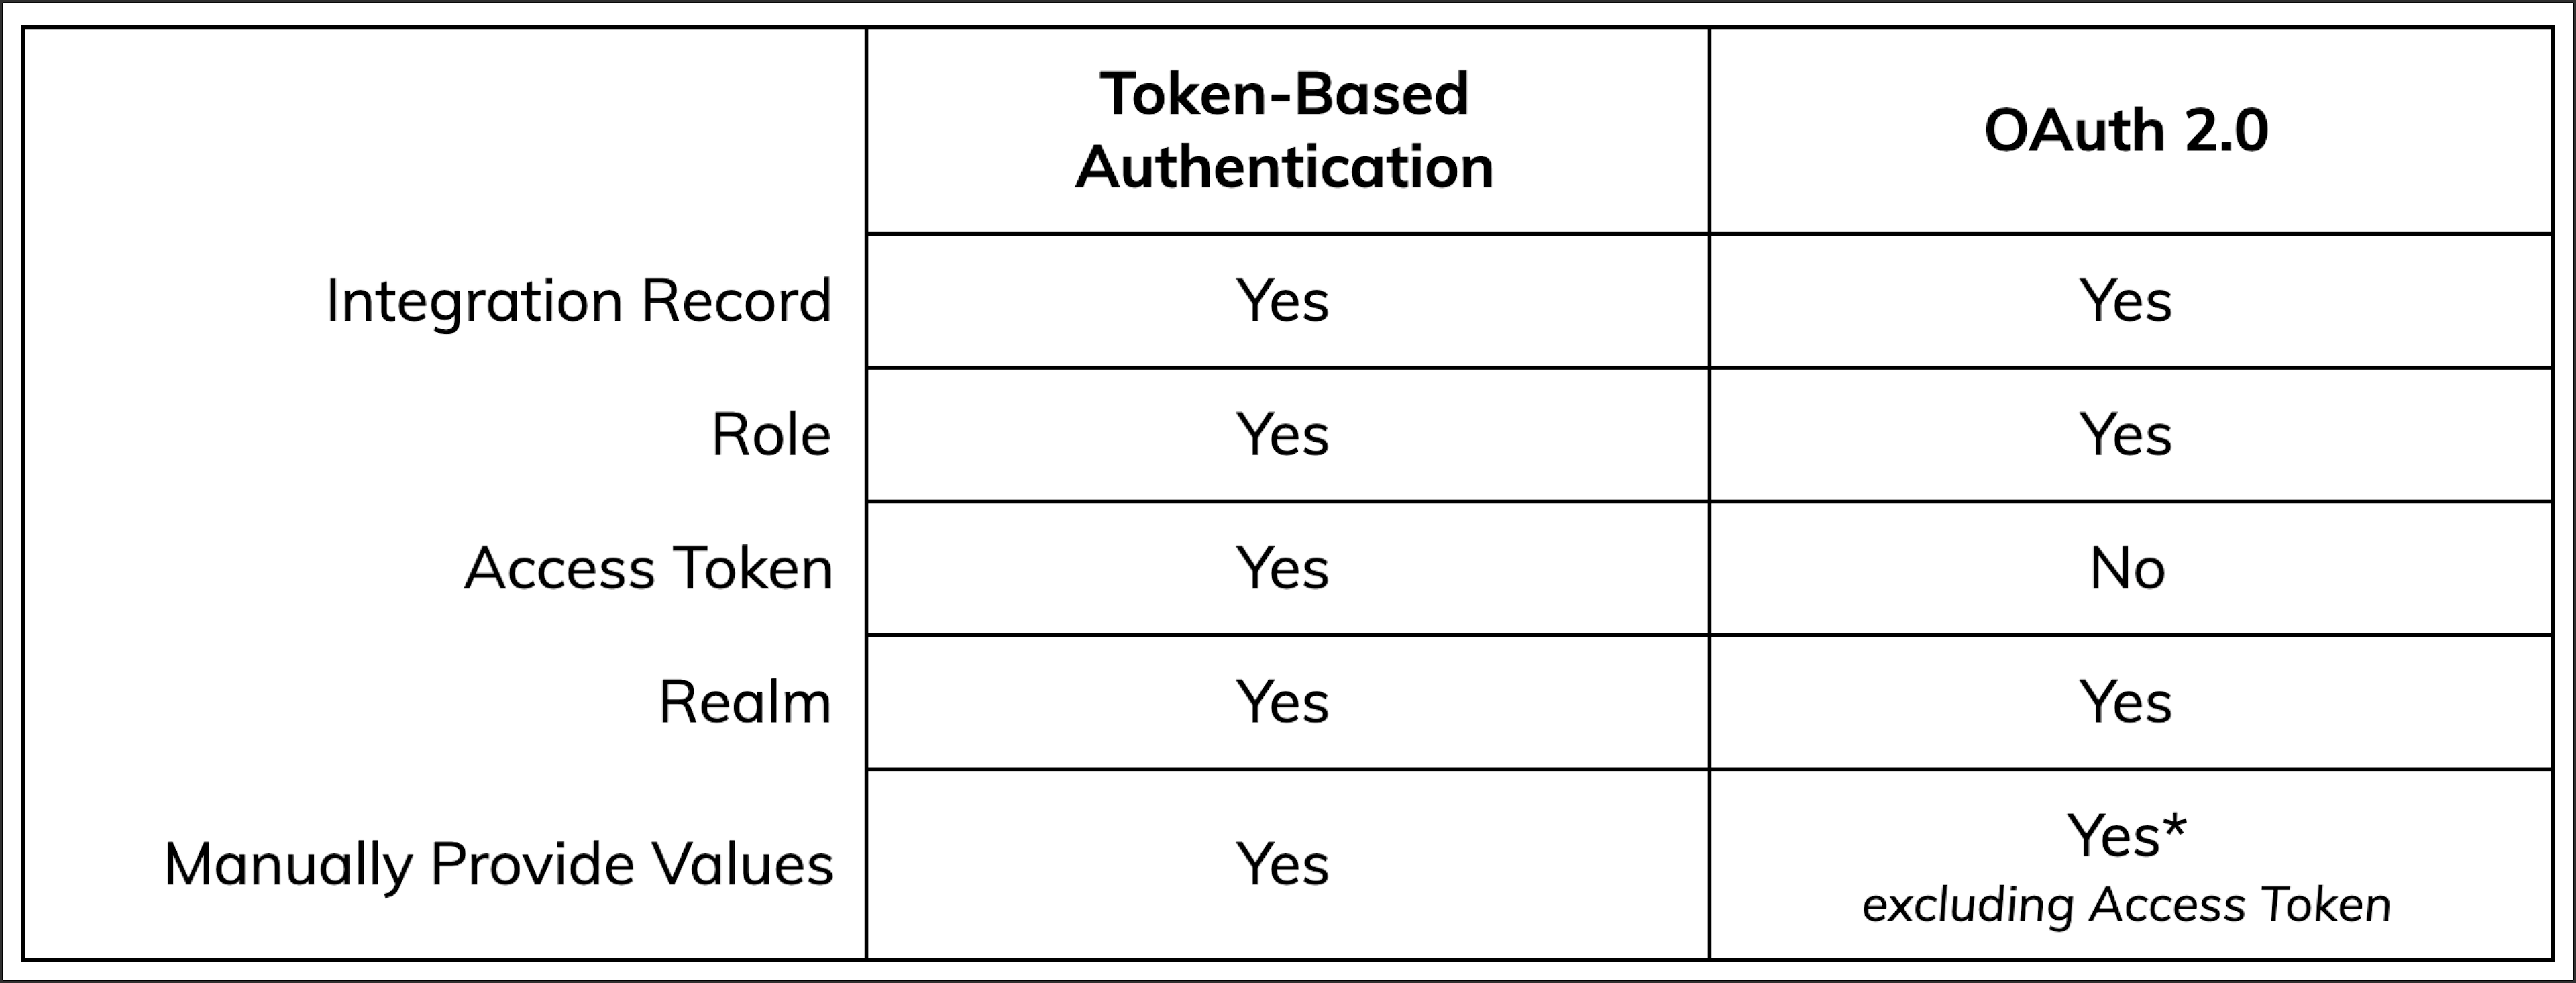 Image of authentication methods